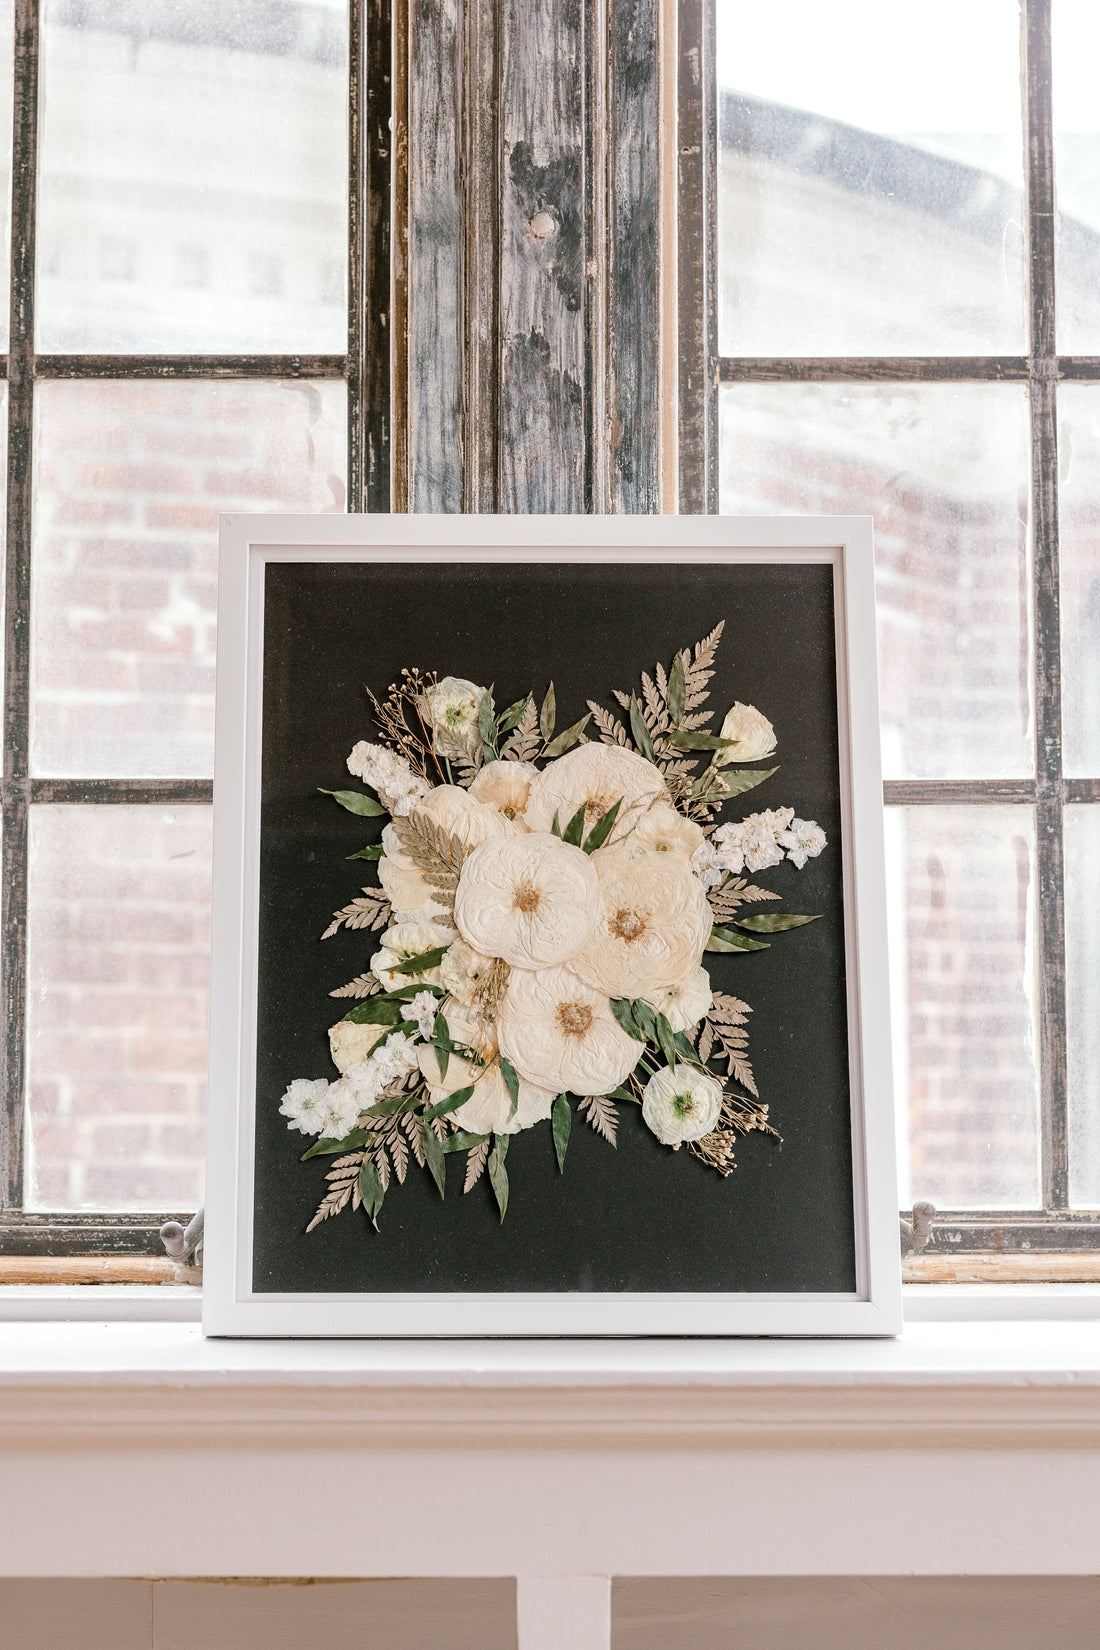 Pressed White florals against a black background showcased in a window sill. 